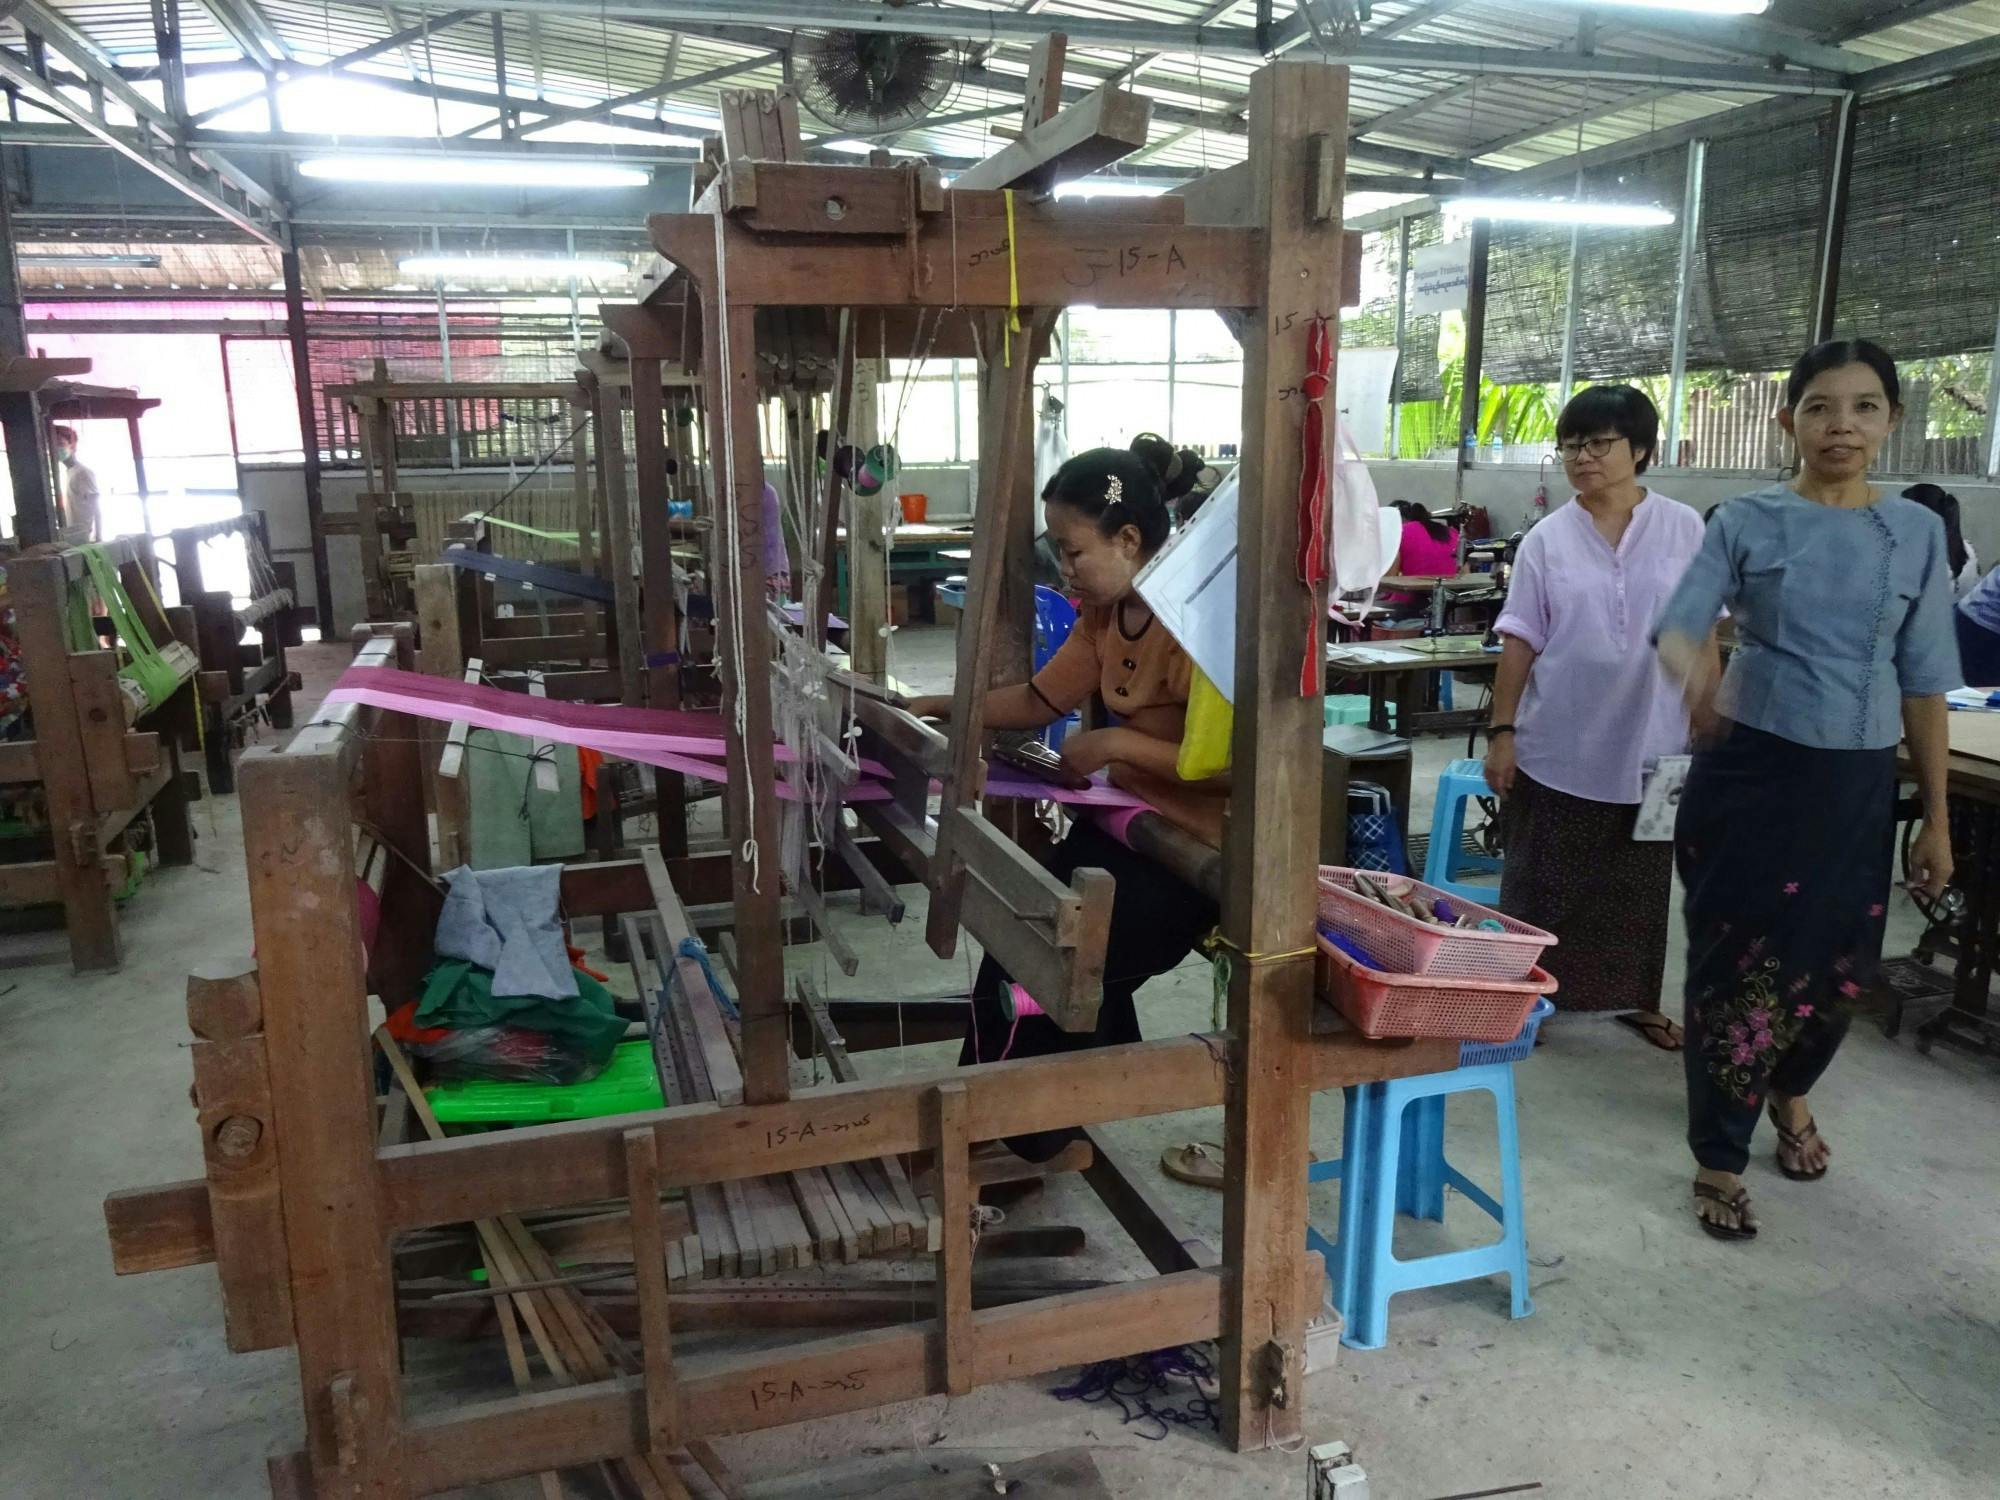 Students learn to weave at a vocational weaving school